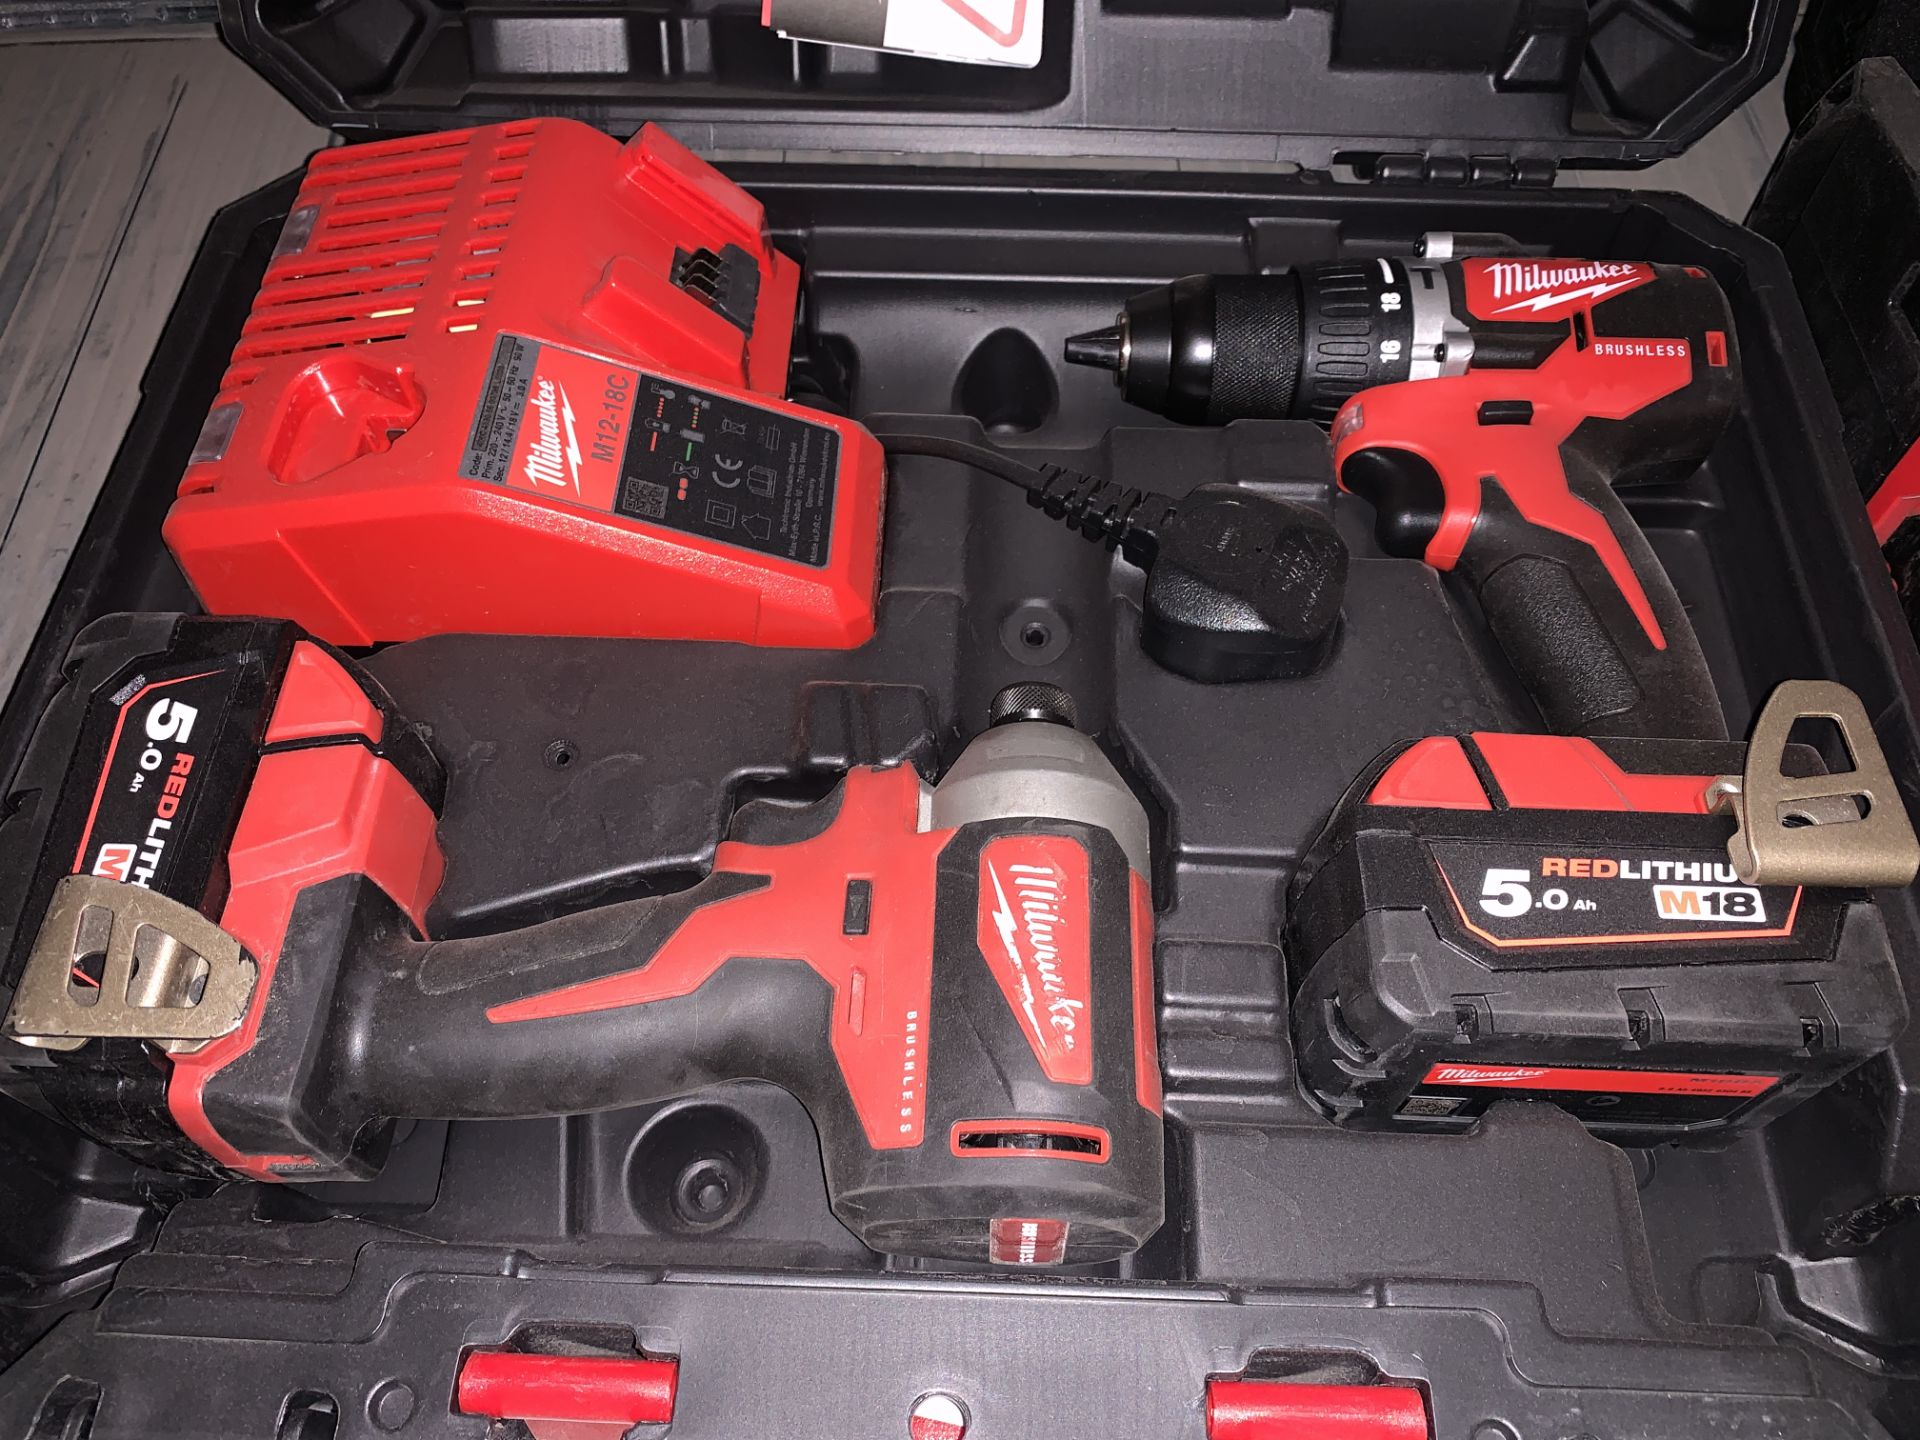 MILWAUKEE TWIN PACK COMBI DRILL AND IMPACT DRIVER COMES WITH 2 BATTERIES, CHARGER AND CARRY CASE (